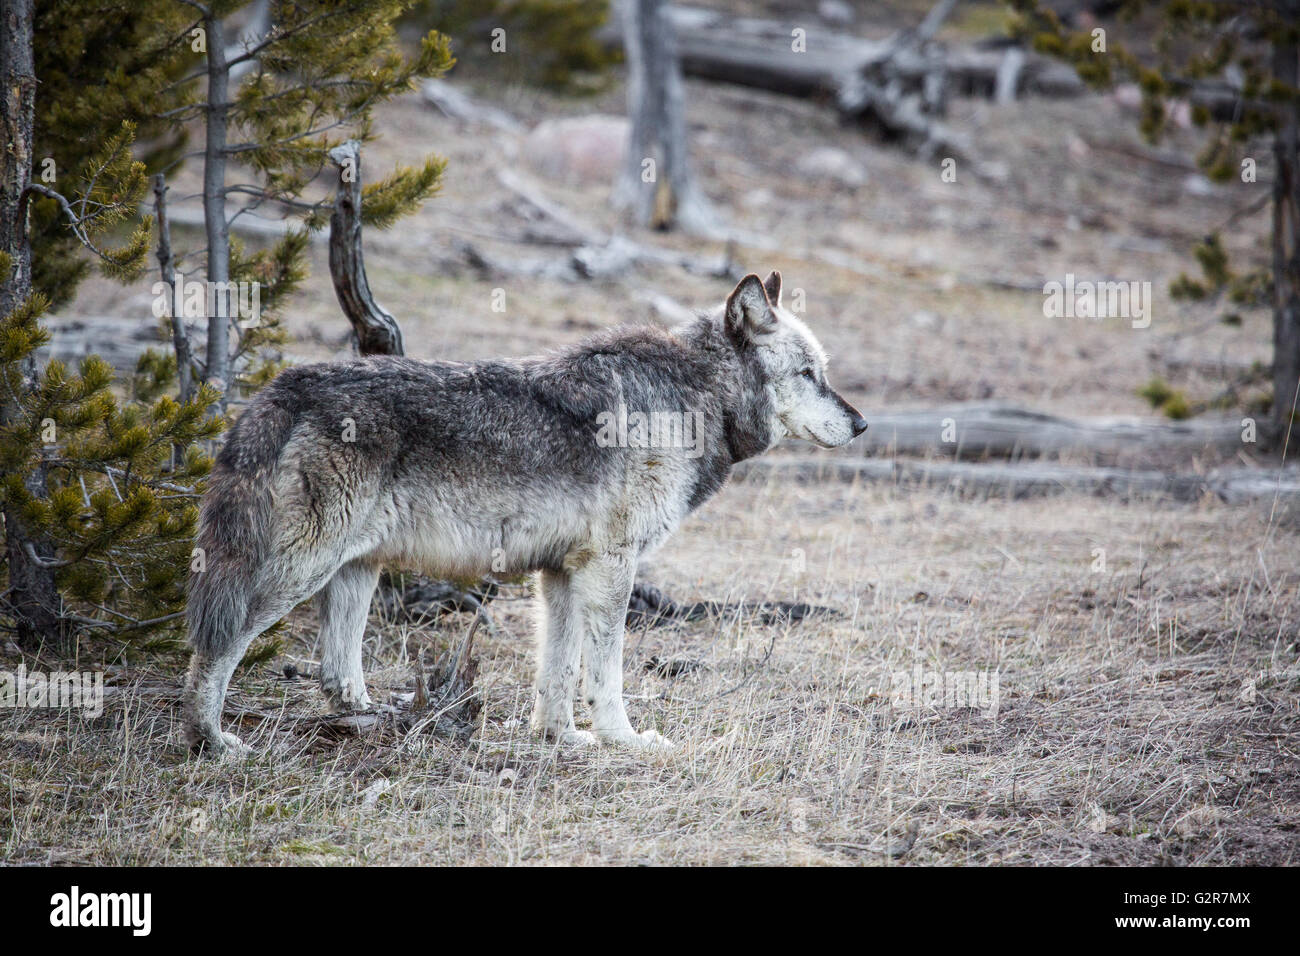 The alpha male grey wolf from the Canyon pack in spring at Yellowstone National Park April 6, 2016 in Yellowstone, Wyoming. Stock Photo